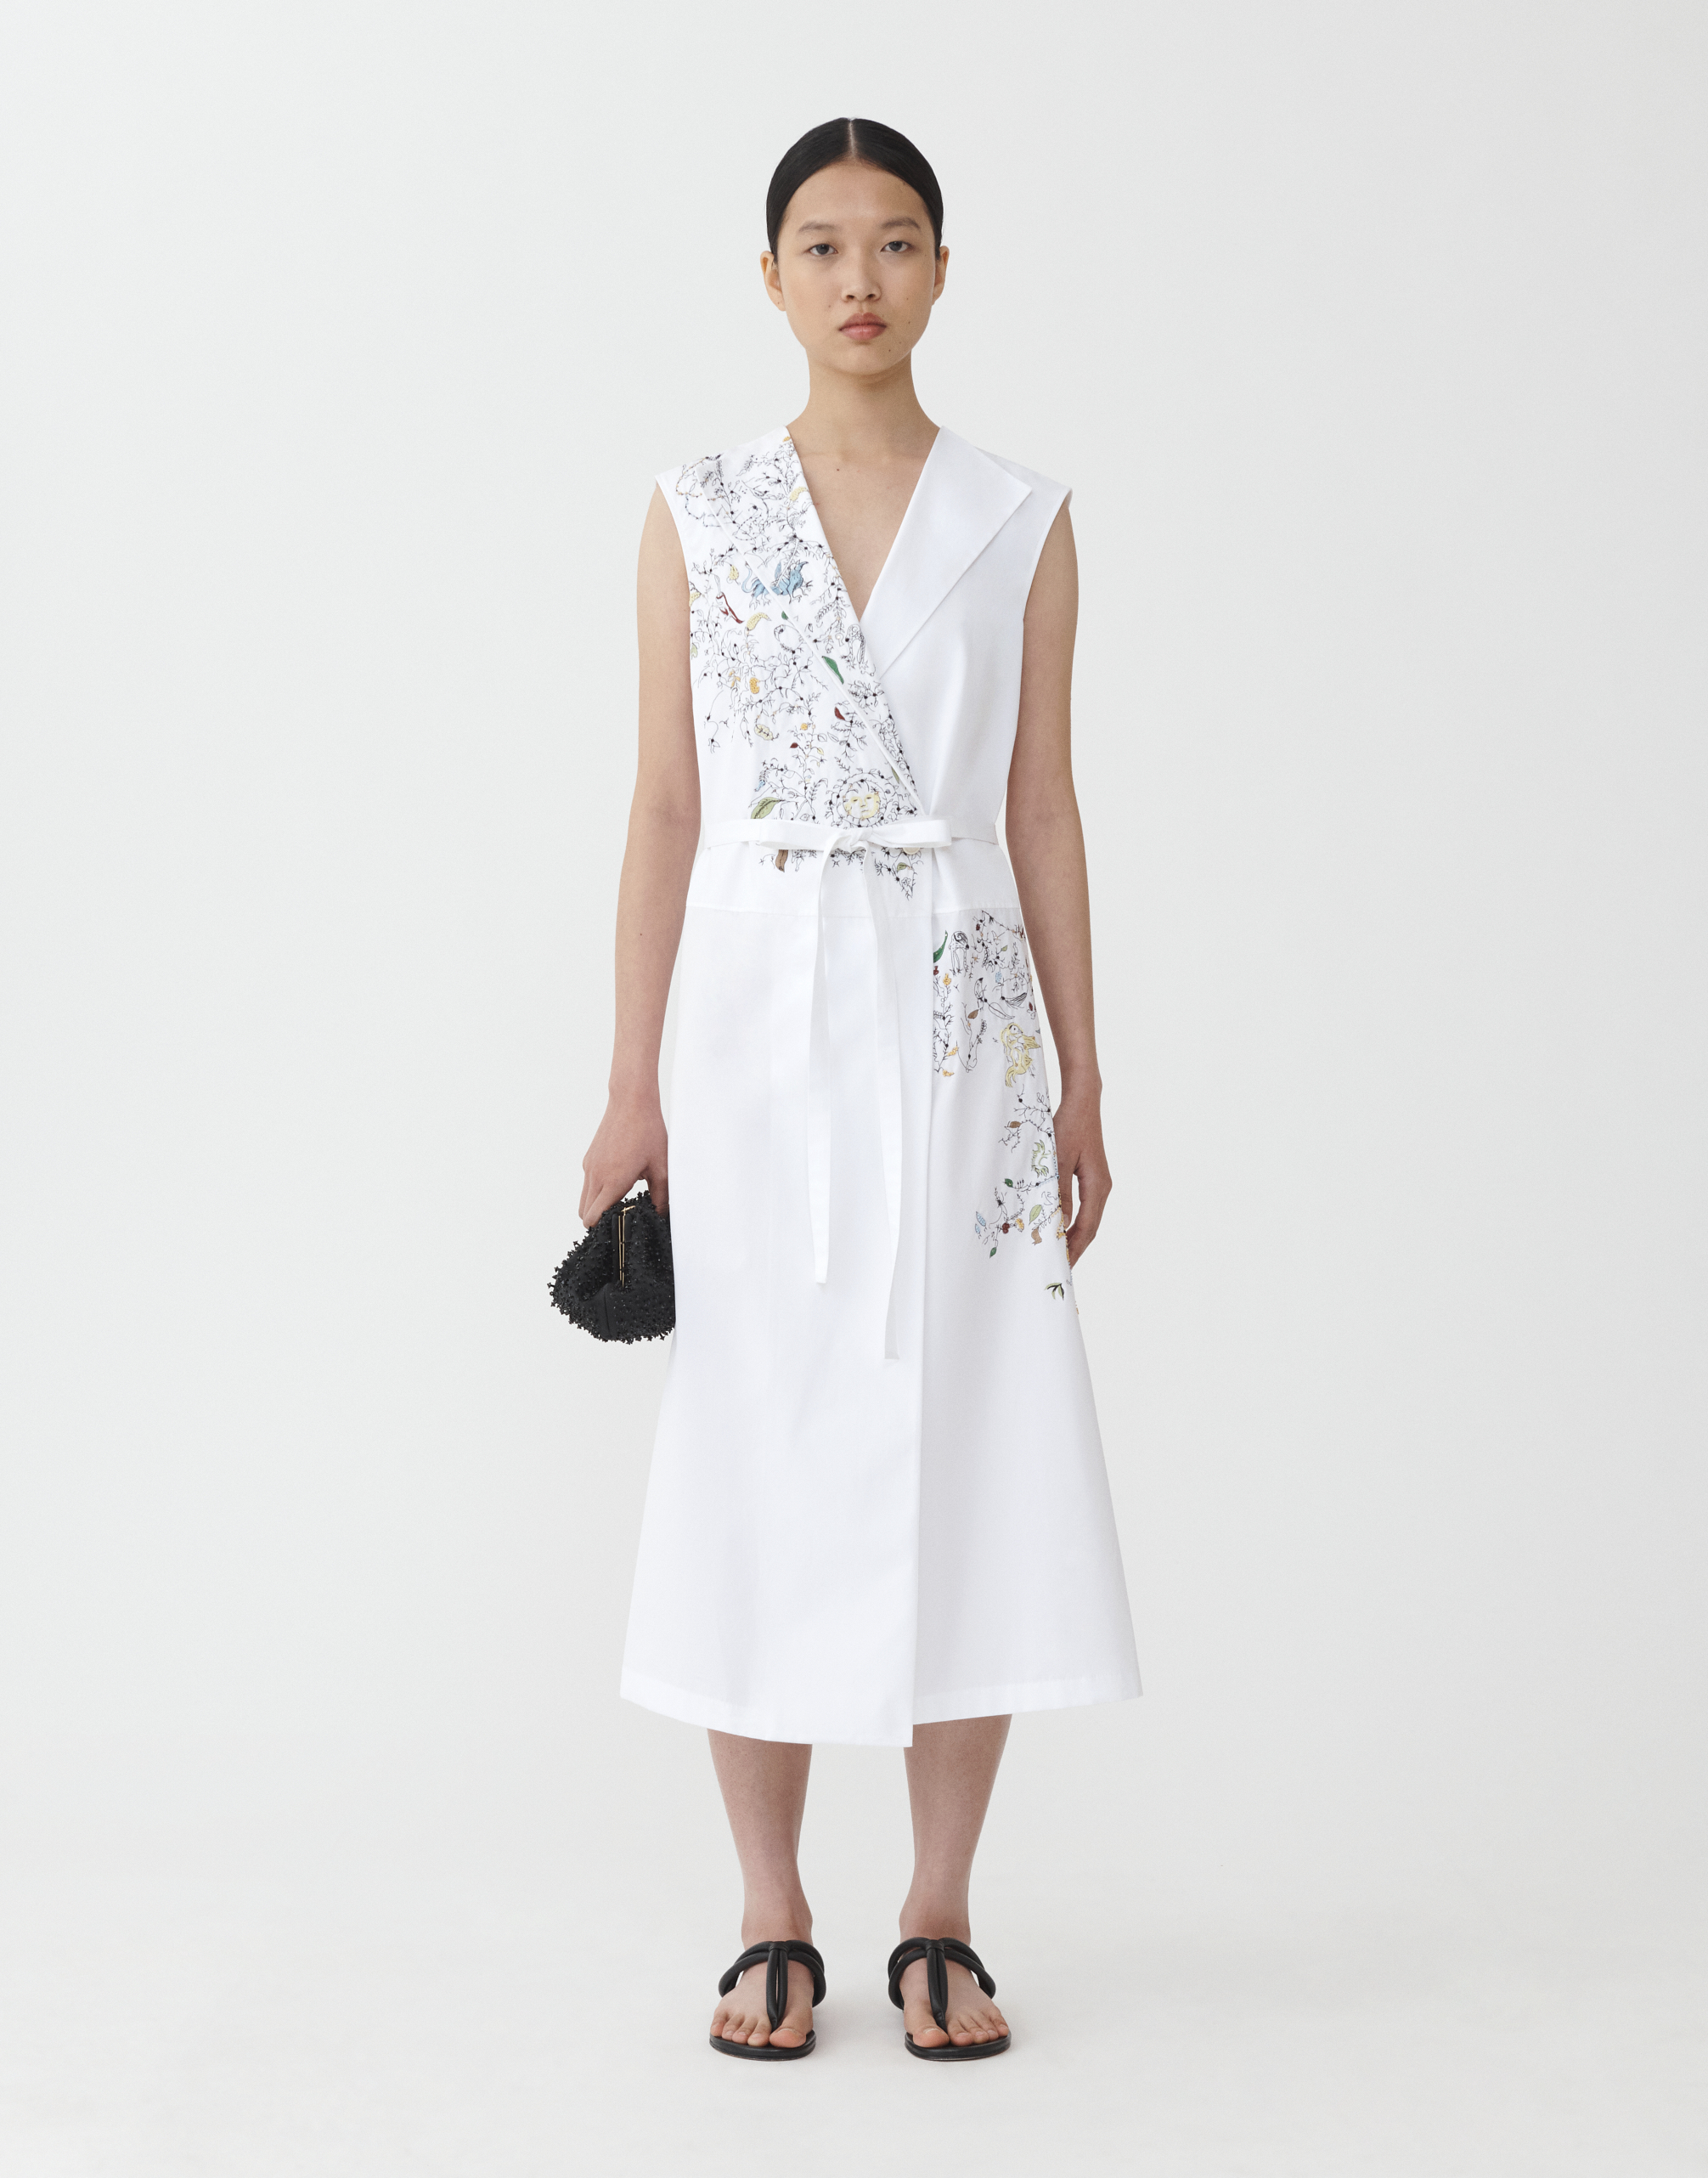 Poplin dress with embroidery, white